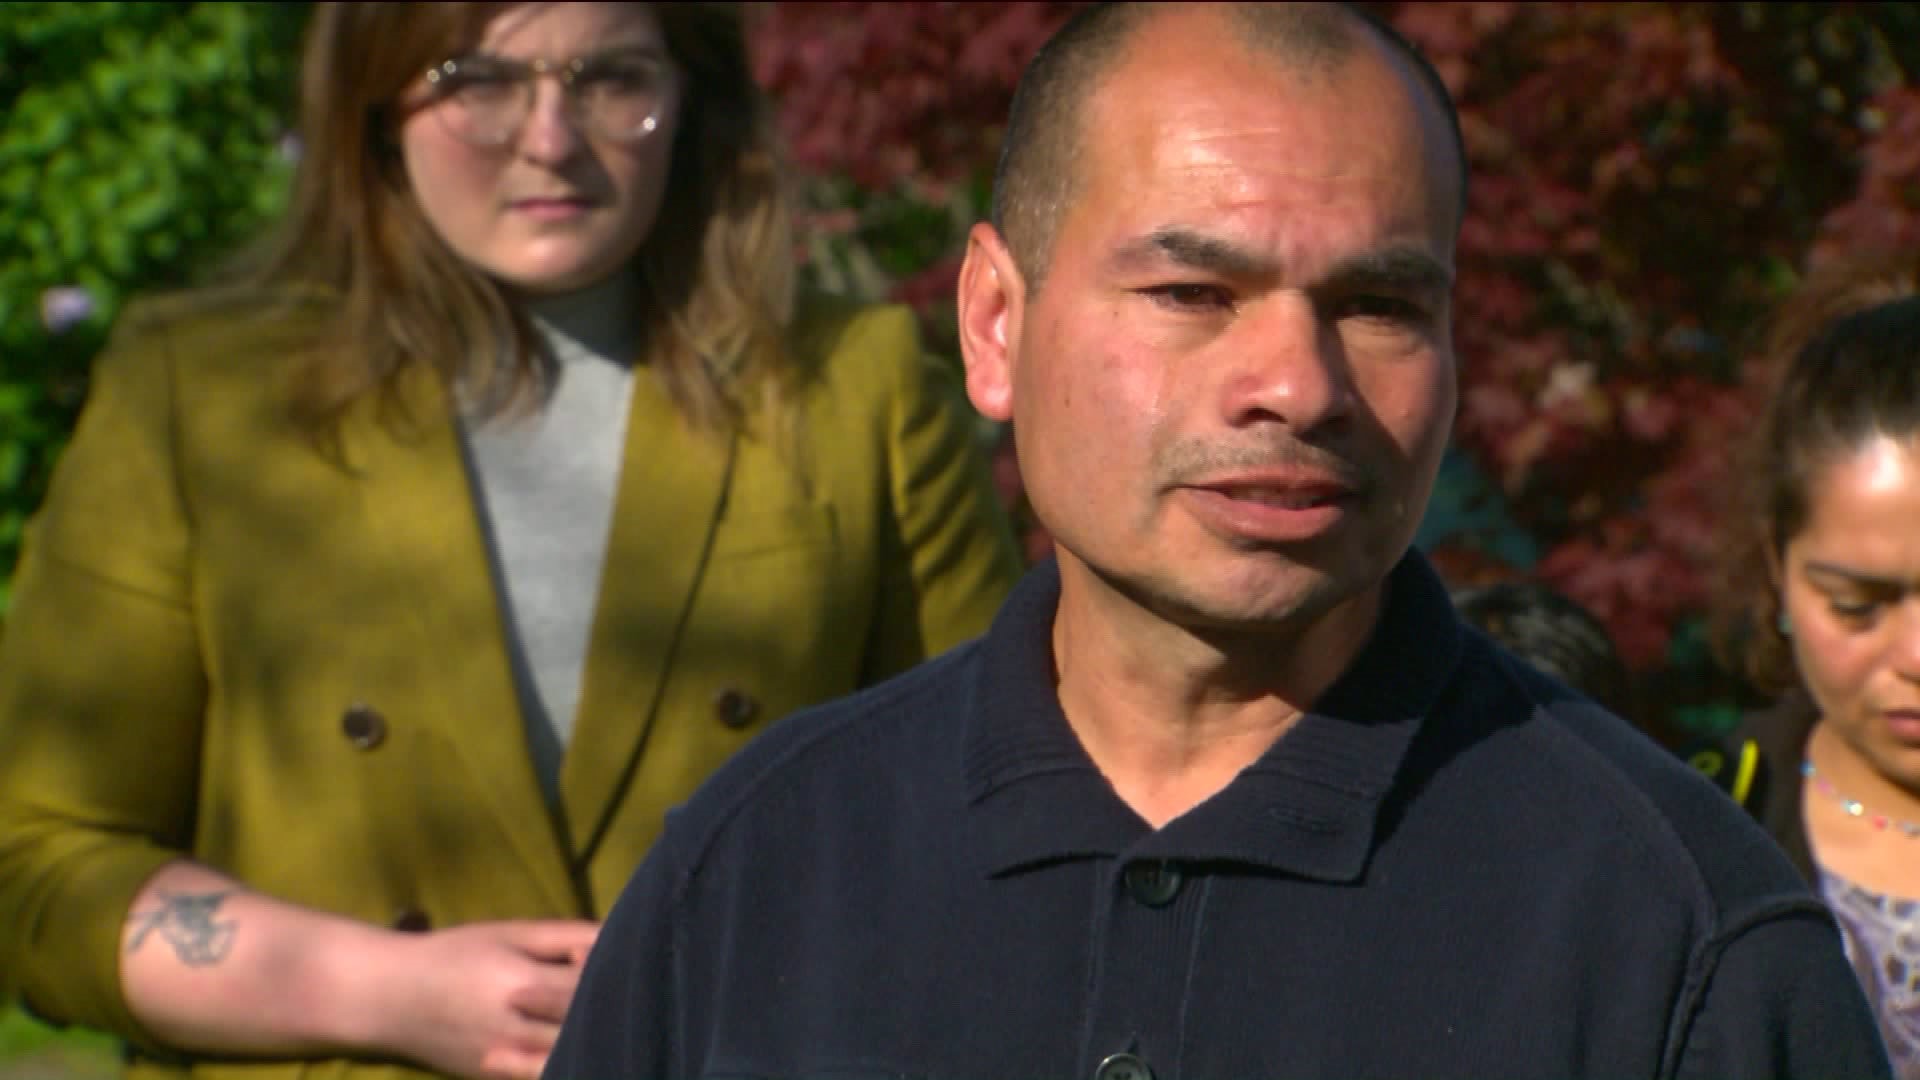 Derby father scheduled to be deported, granted 30 day stay